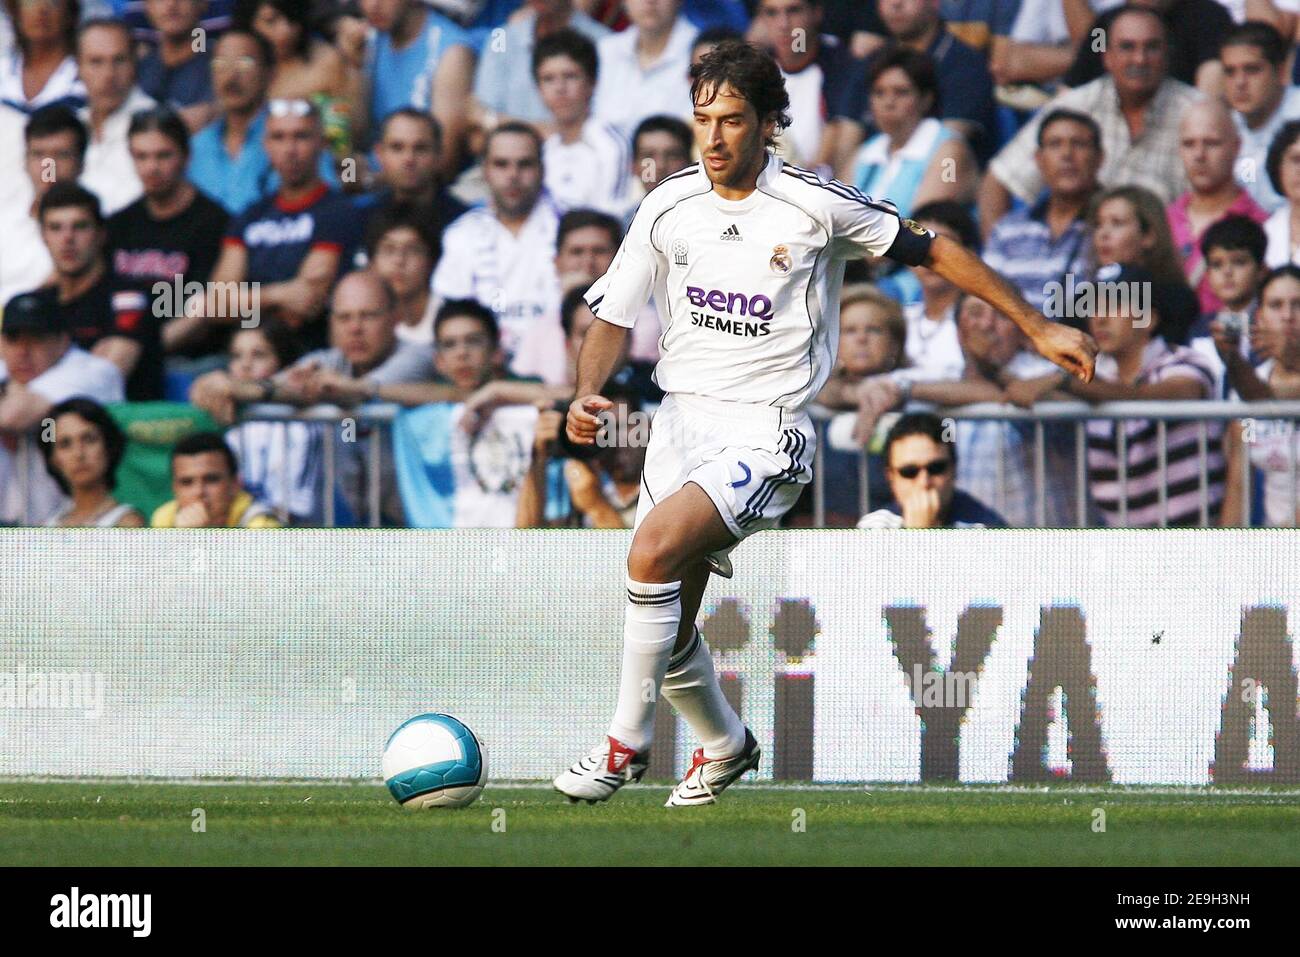 Real Madrid's Gonzales Blanco Raul in action during the Spanish League football match, Real Madrid vs Villareal, in Madrid, Spain, on August 27, 2006. The game ended in a draw 0-0. Photo by Christian Liewig/ABACAPRESS.COM Stock Photo